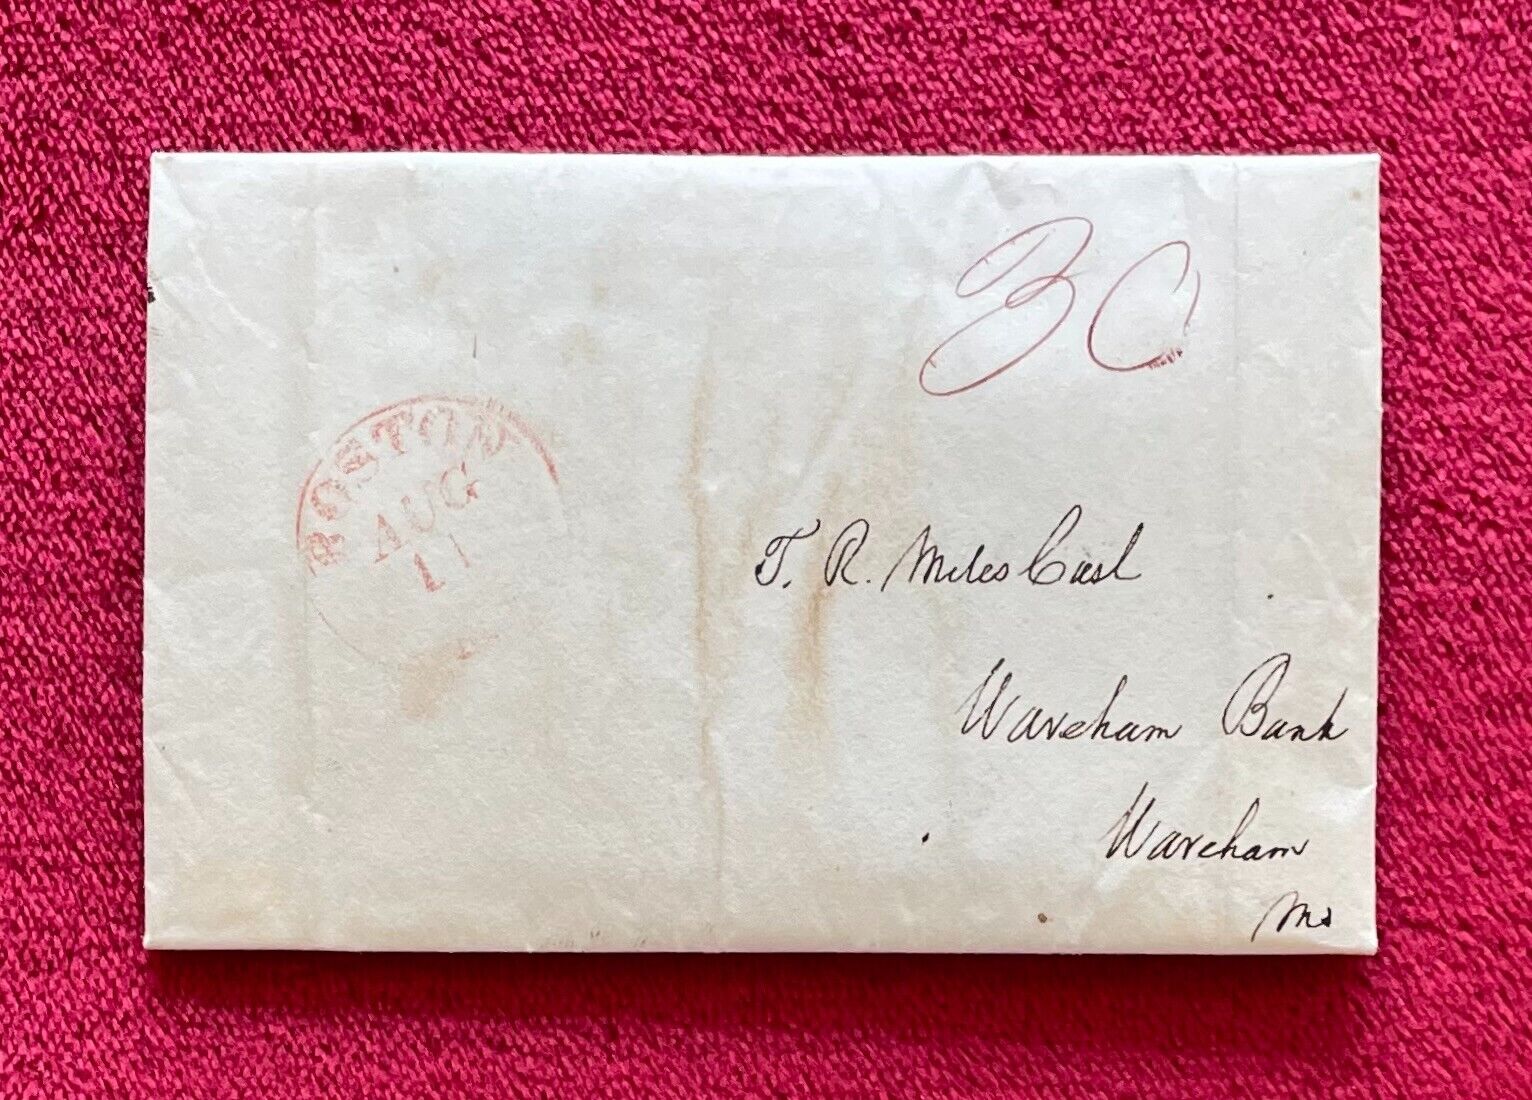 1834 STAMPLESS COVER/LETTER BOSTON - TO WAREHAM BANK, MA FROM SUFFOLK BANK